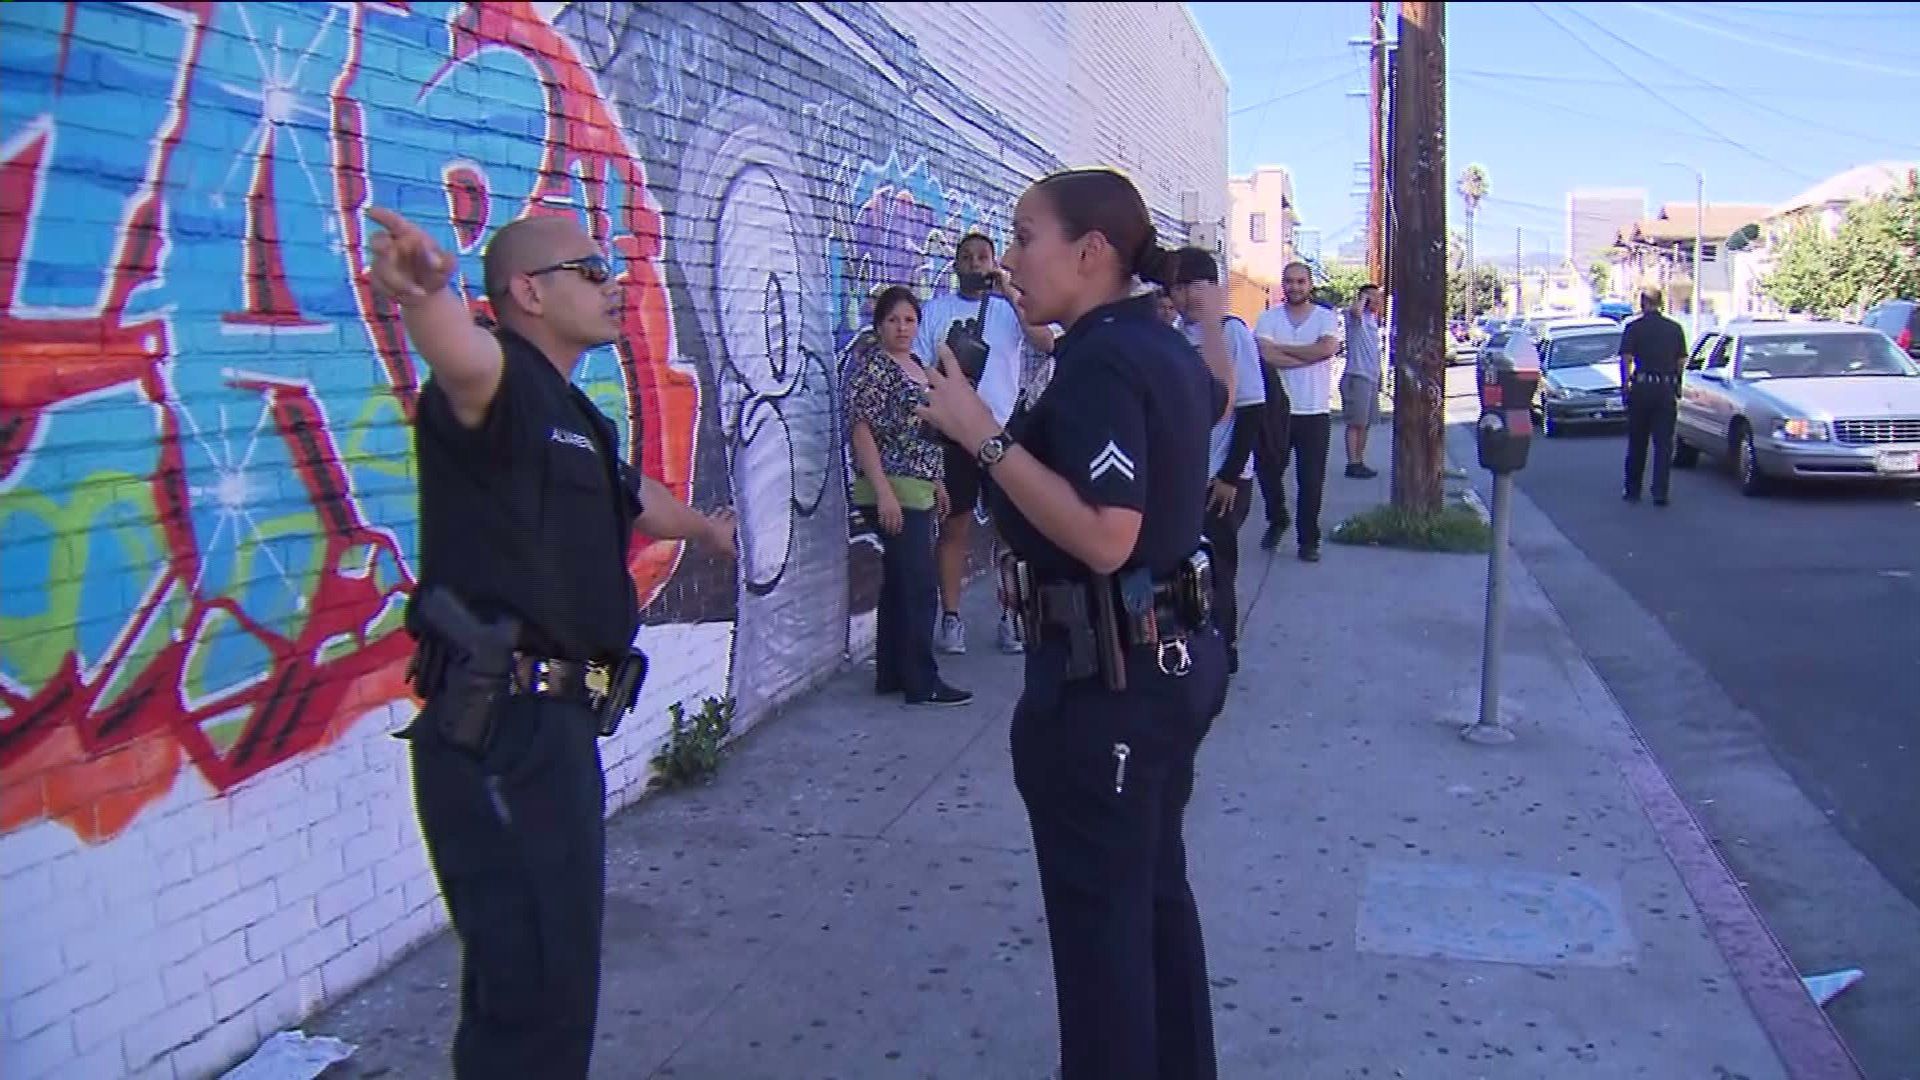 Shots Fired as LAPD Searches for Gunman in Pico Union KTLA